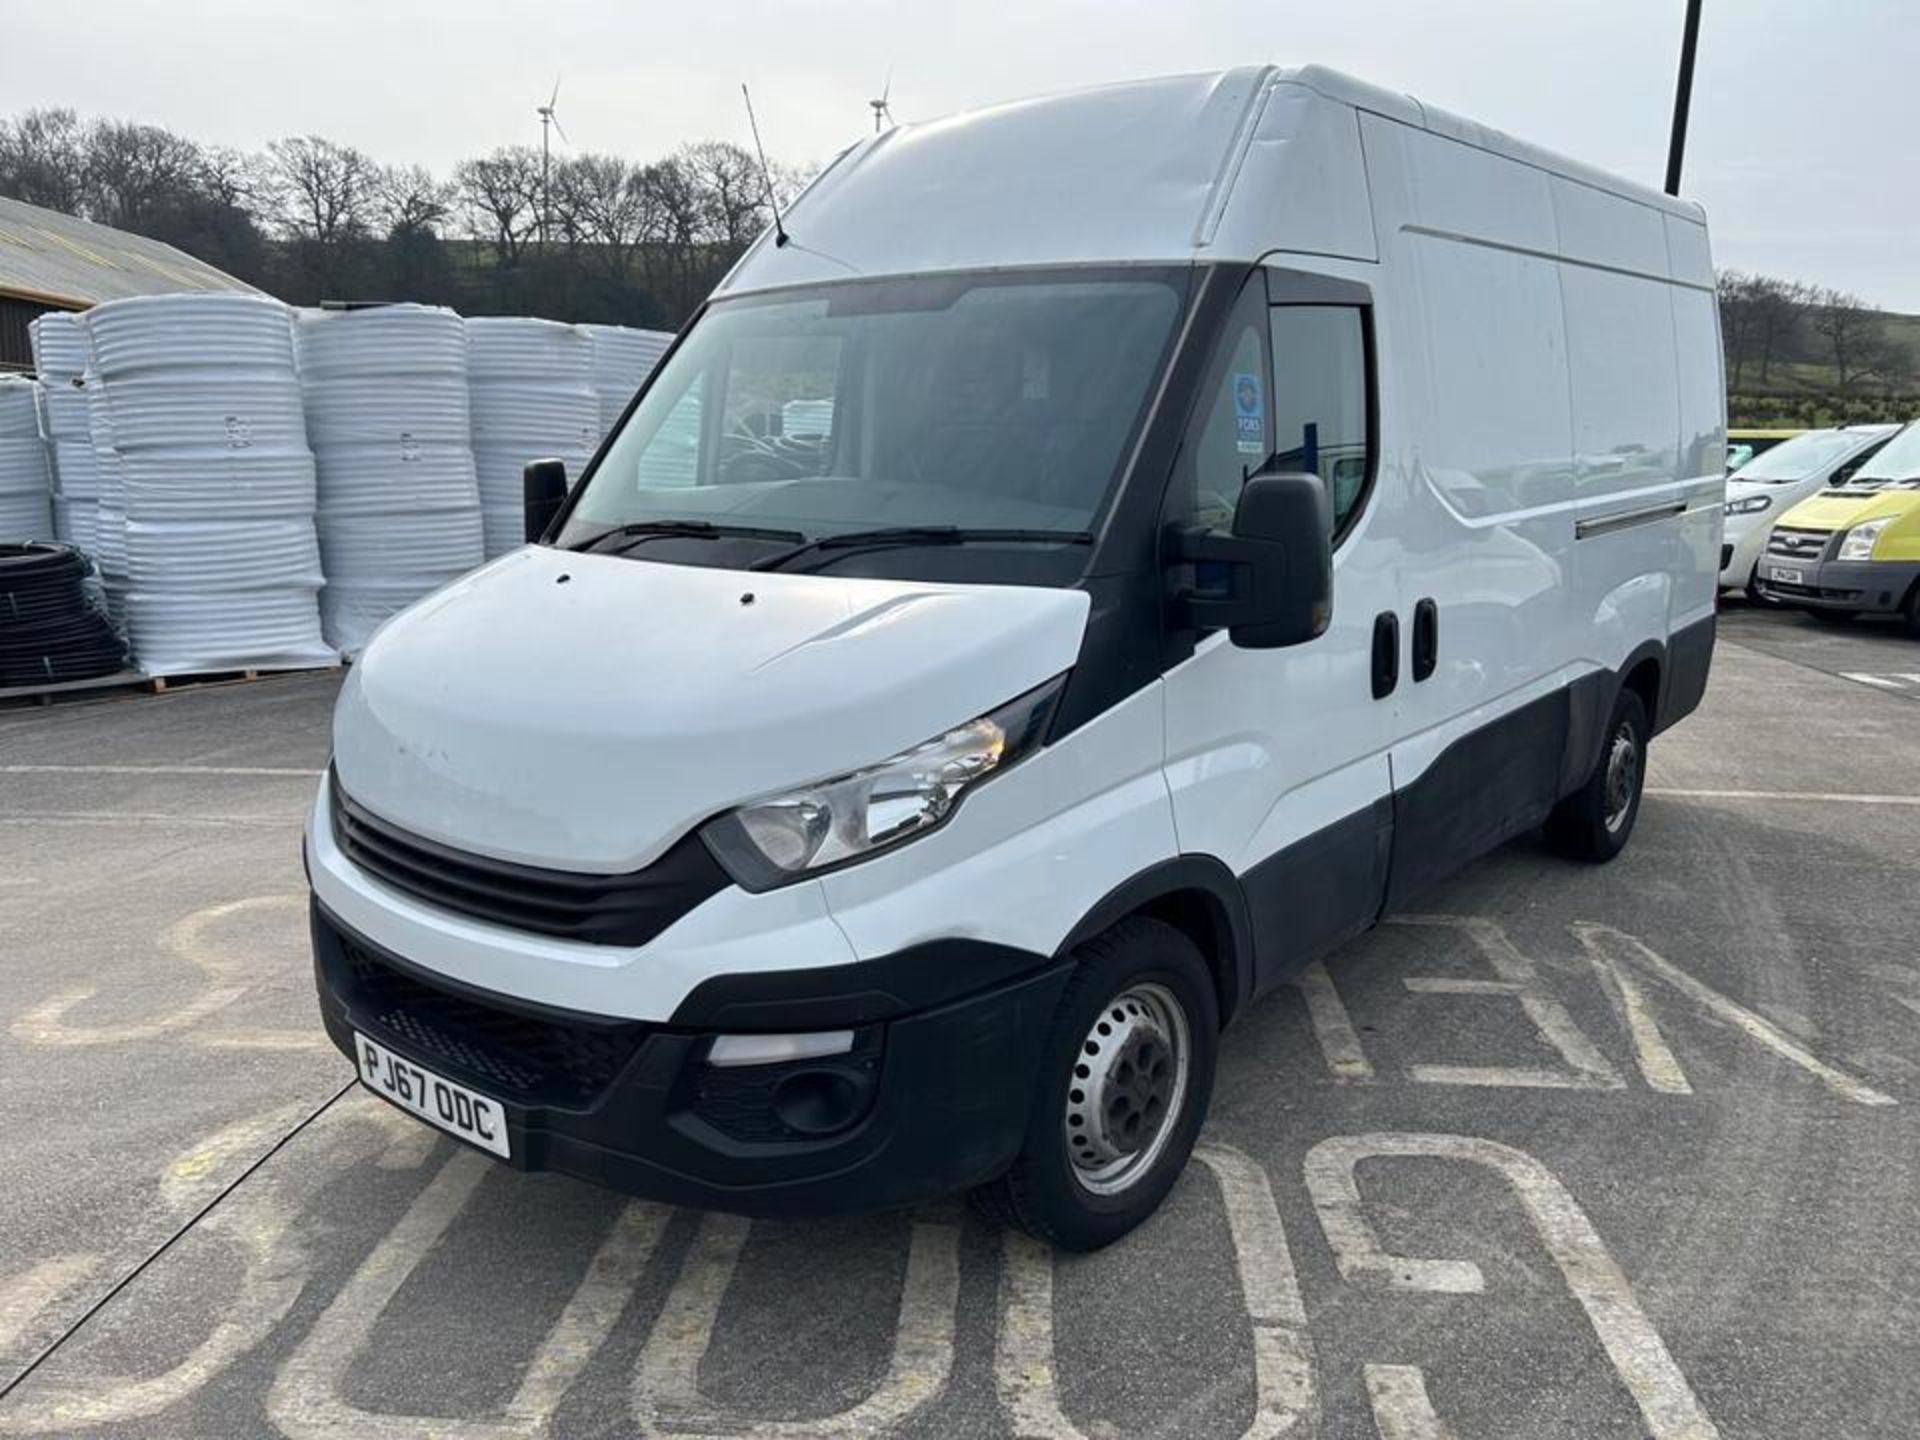 2017 IVECO DAILY -123K MILES - HPI CLEAR- READY TO WORK! - Image 2 of 13